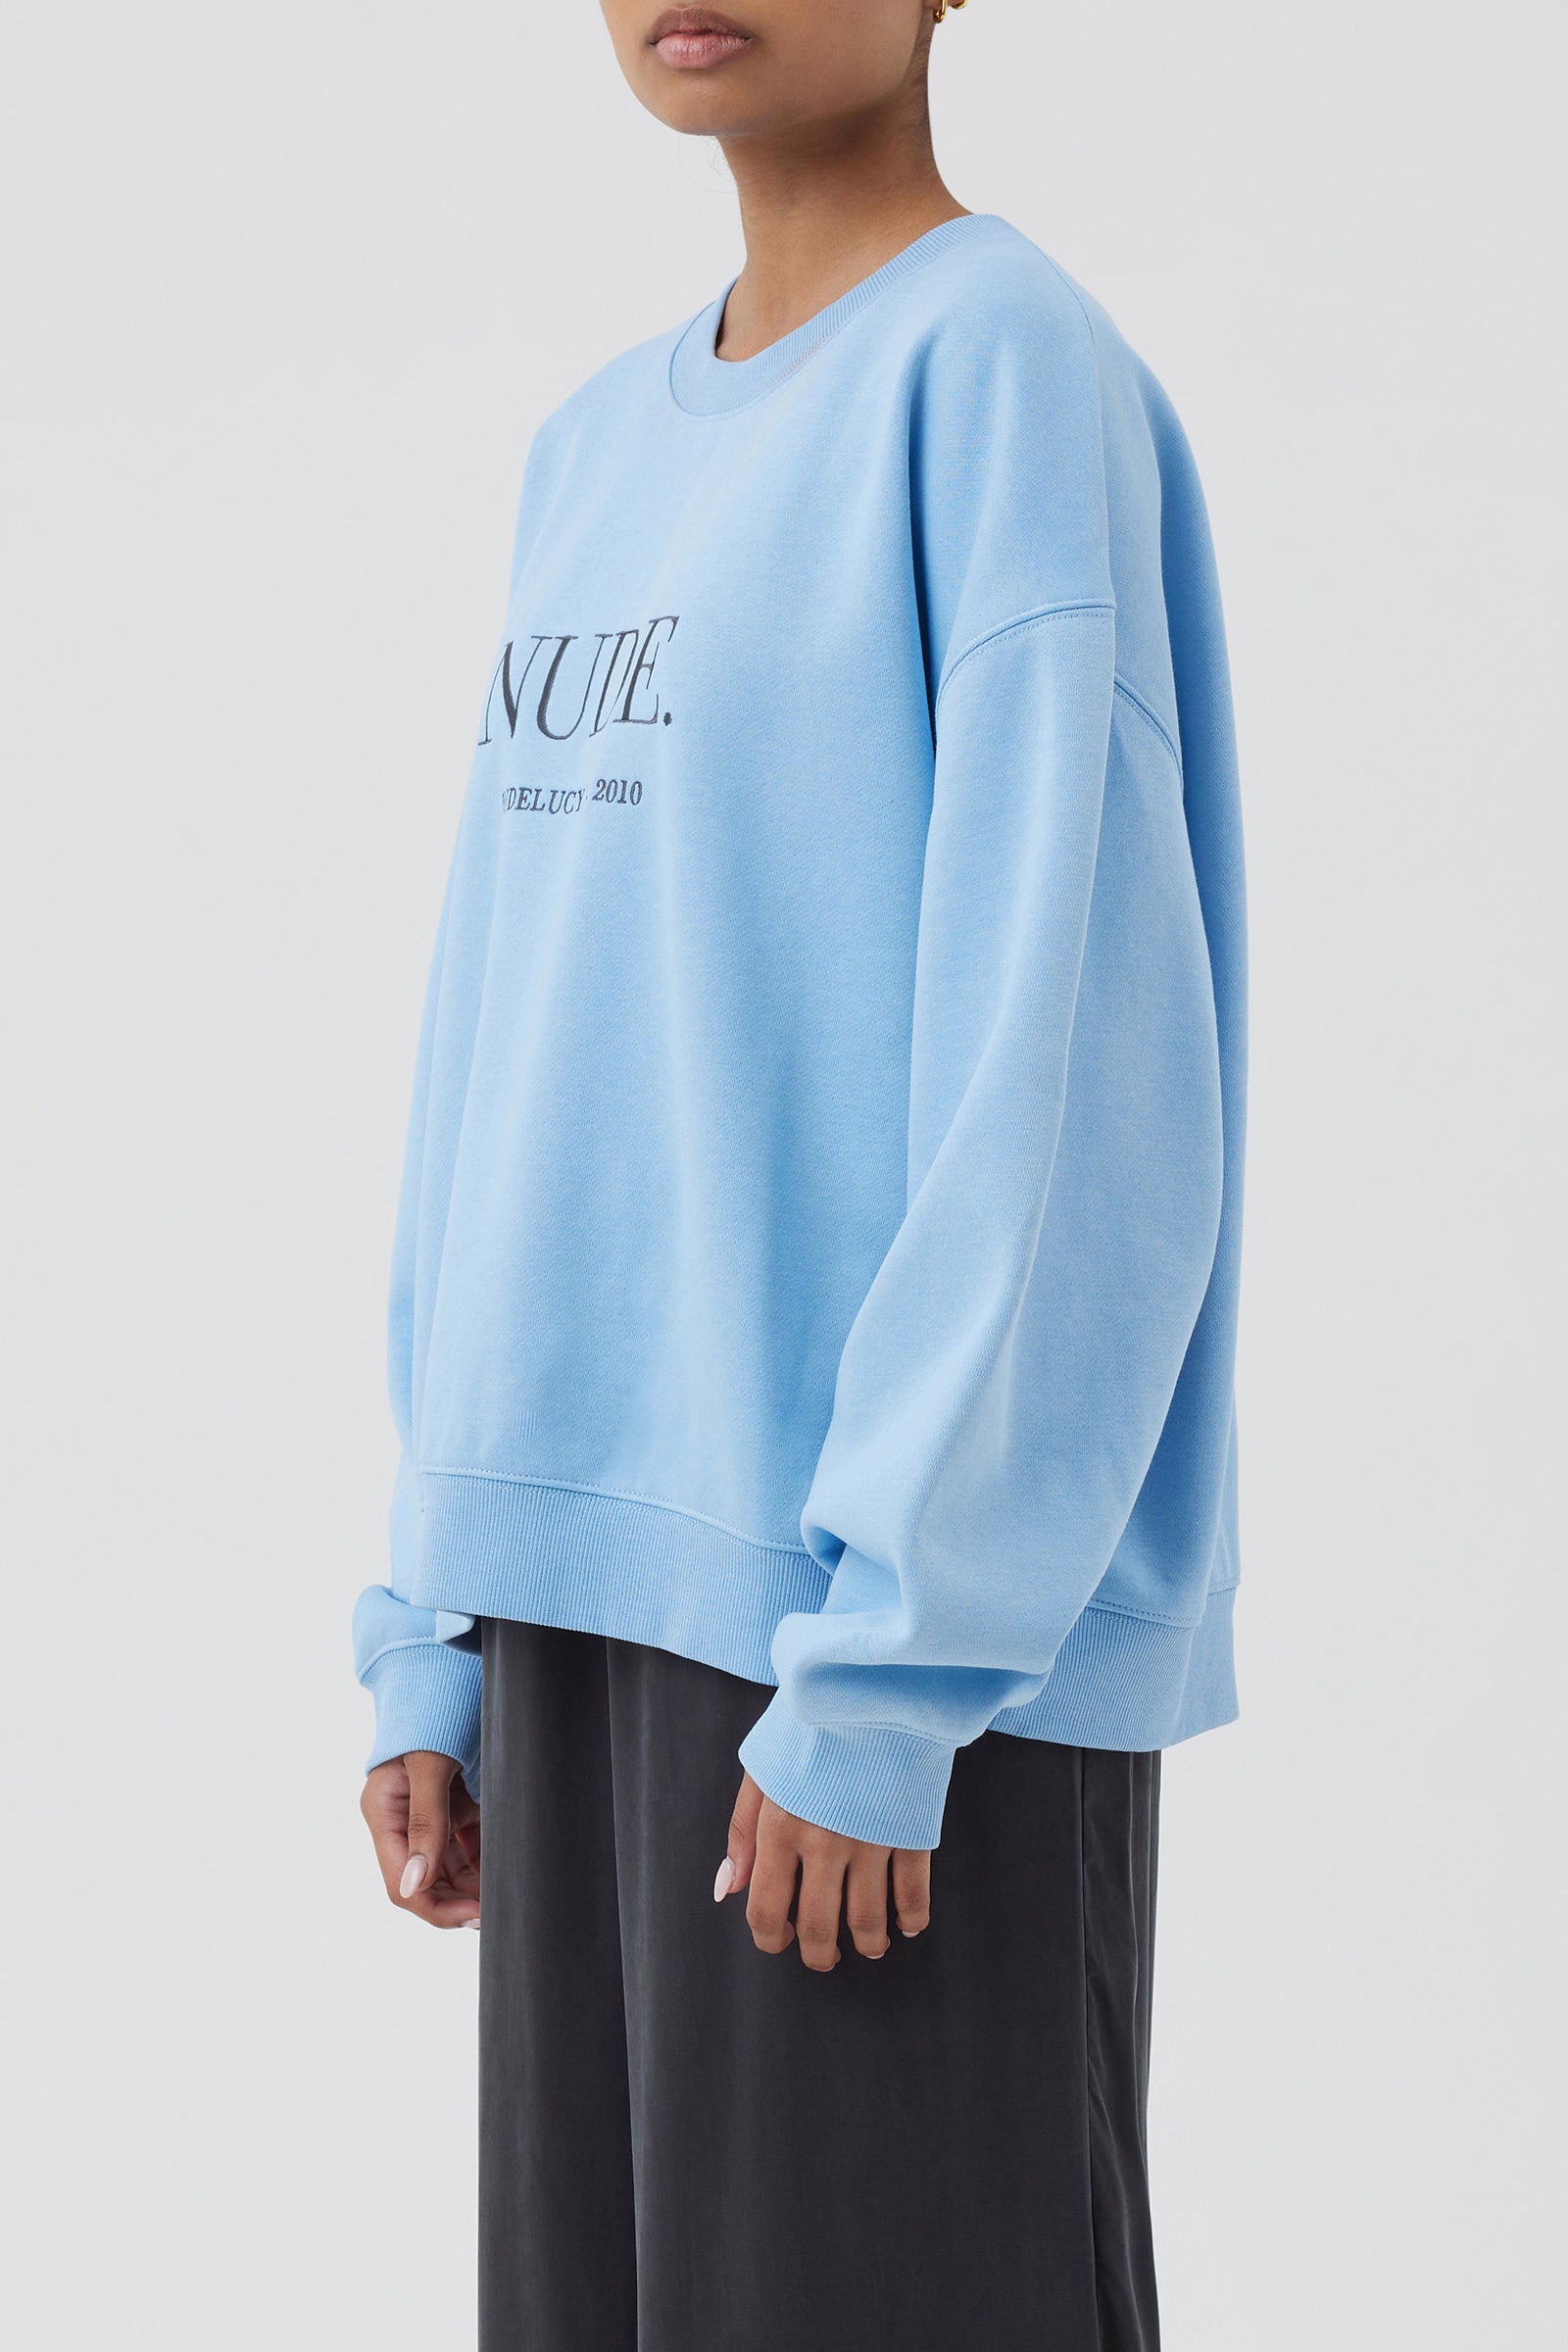 Nude Lucy Nude Sweat In a Blue Horizon Colour